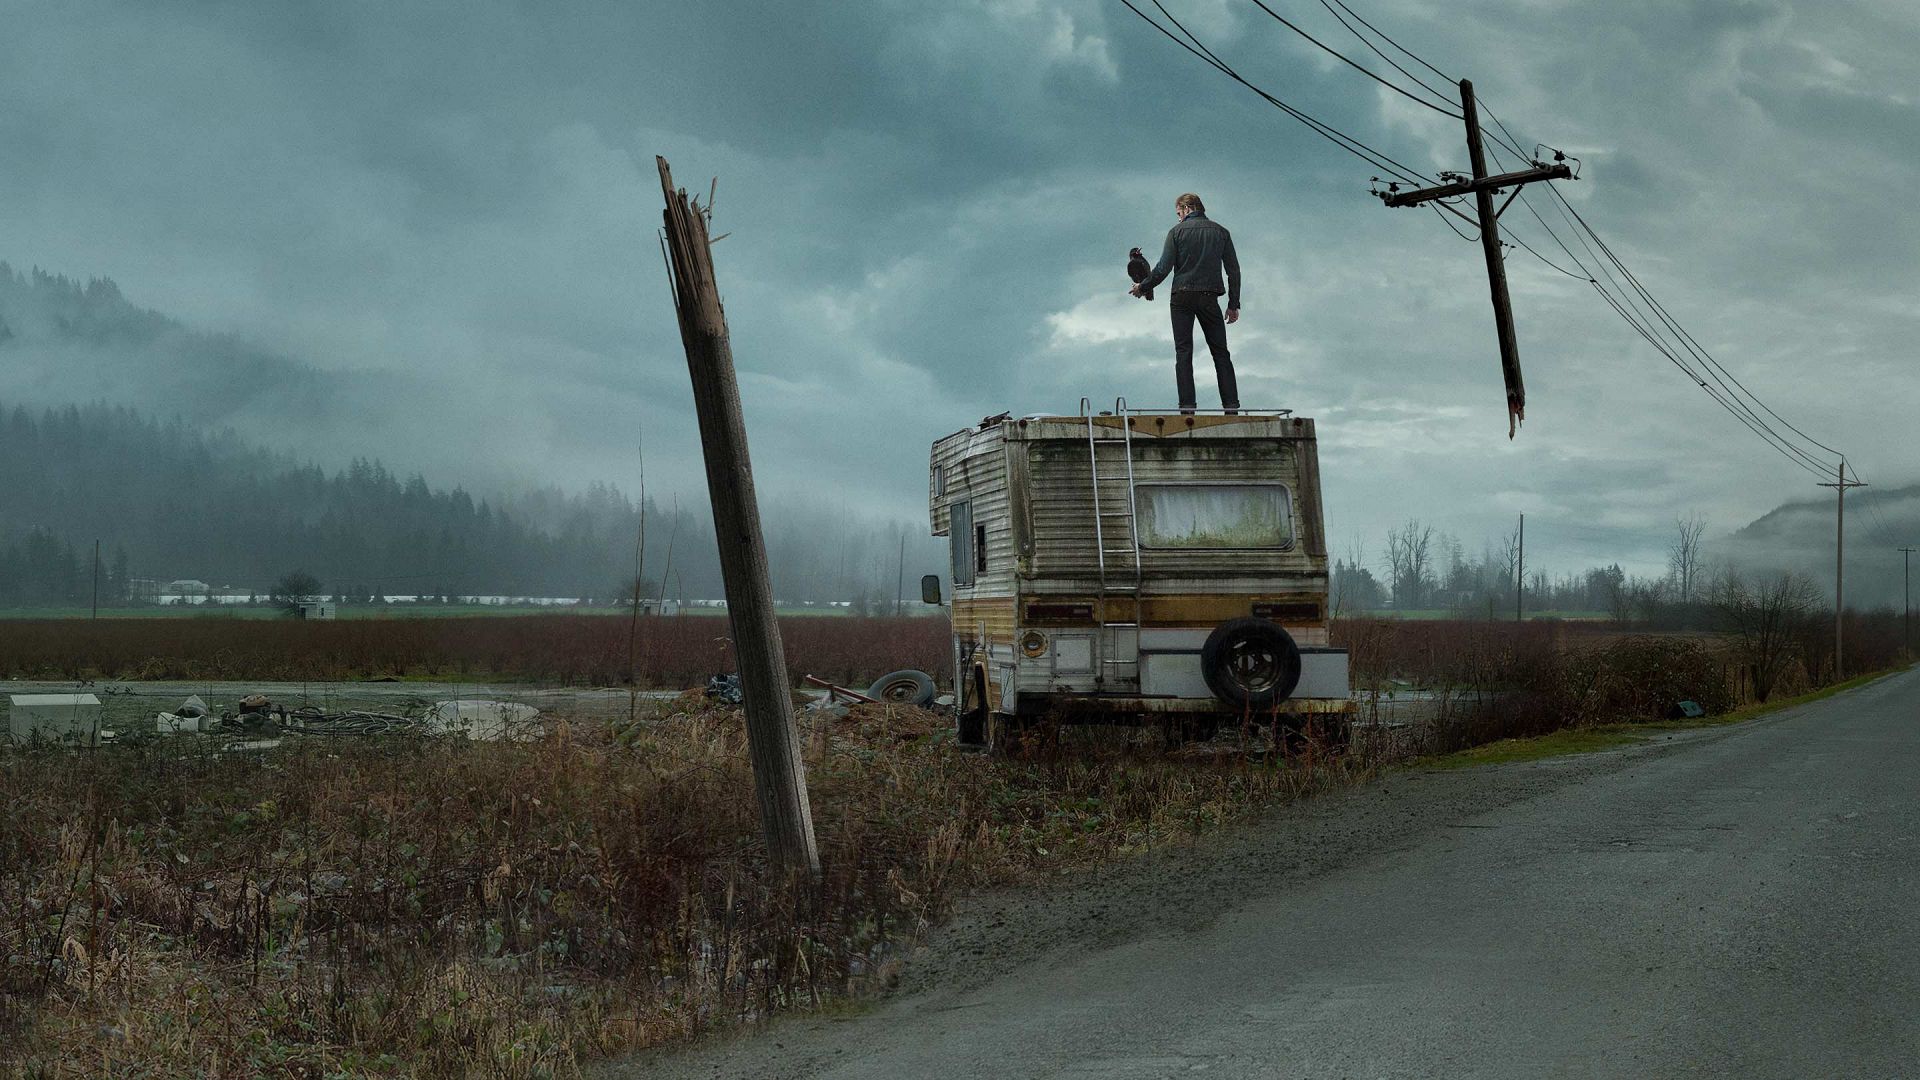 ‘The Stand’ Delivers An Apocalyptic World In New Promo